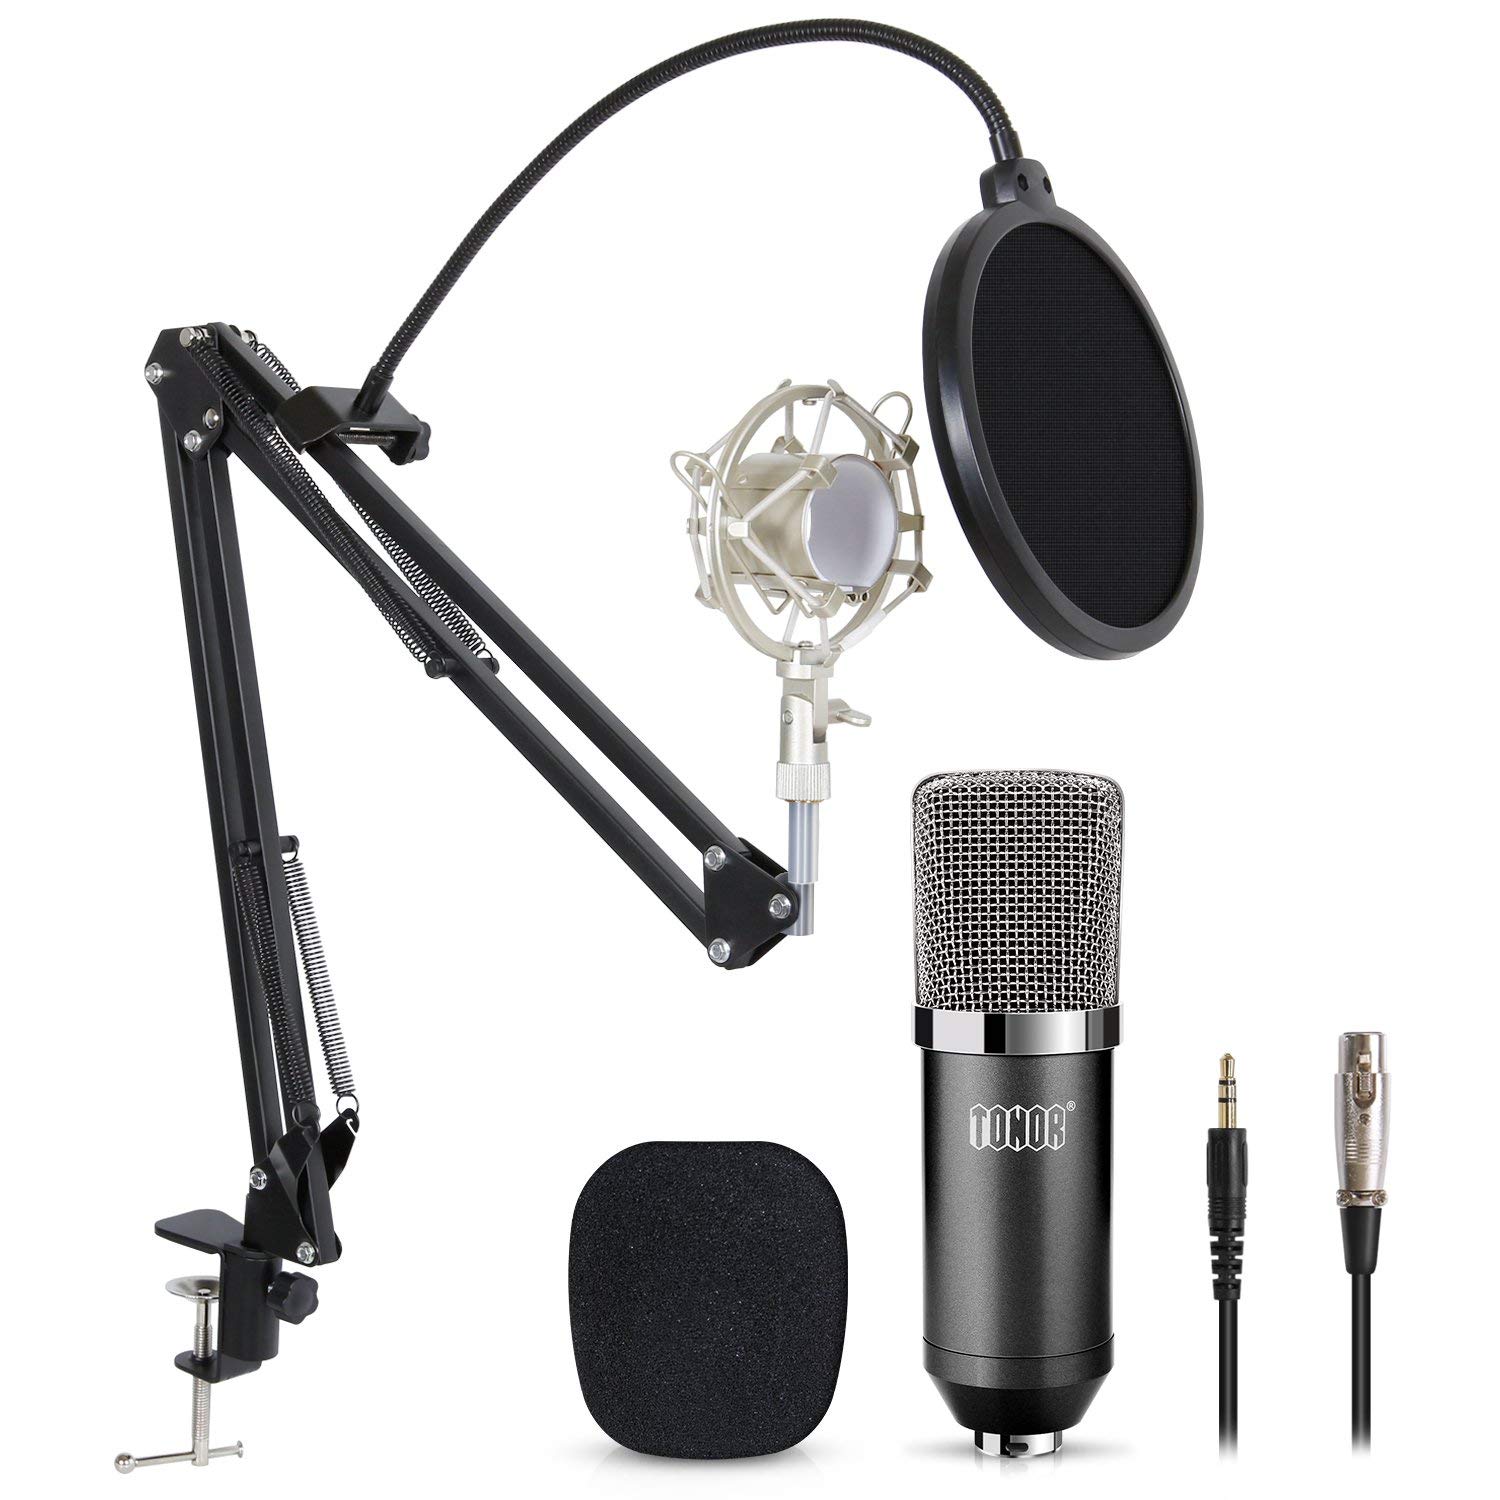 TONOR Professional Studio Condenser Microphone Computer PC Microphone Kit with 3.5mm XLR/Pop Filter/Scissor Arm Stand/Shock Mount for Professional Studio Recording Podcasting Broadcasting, Black